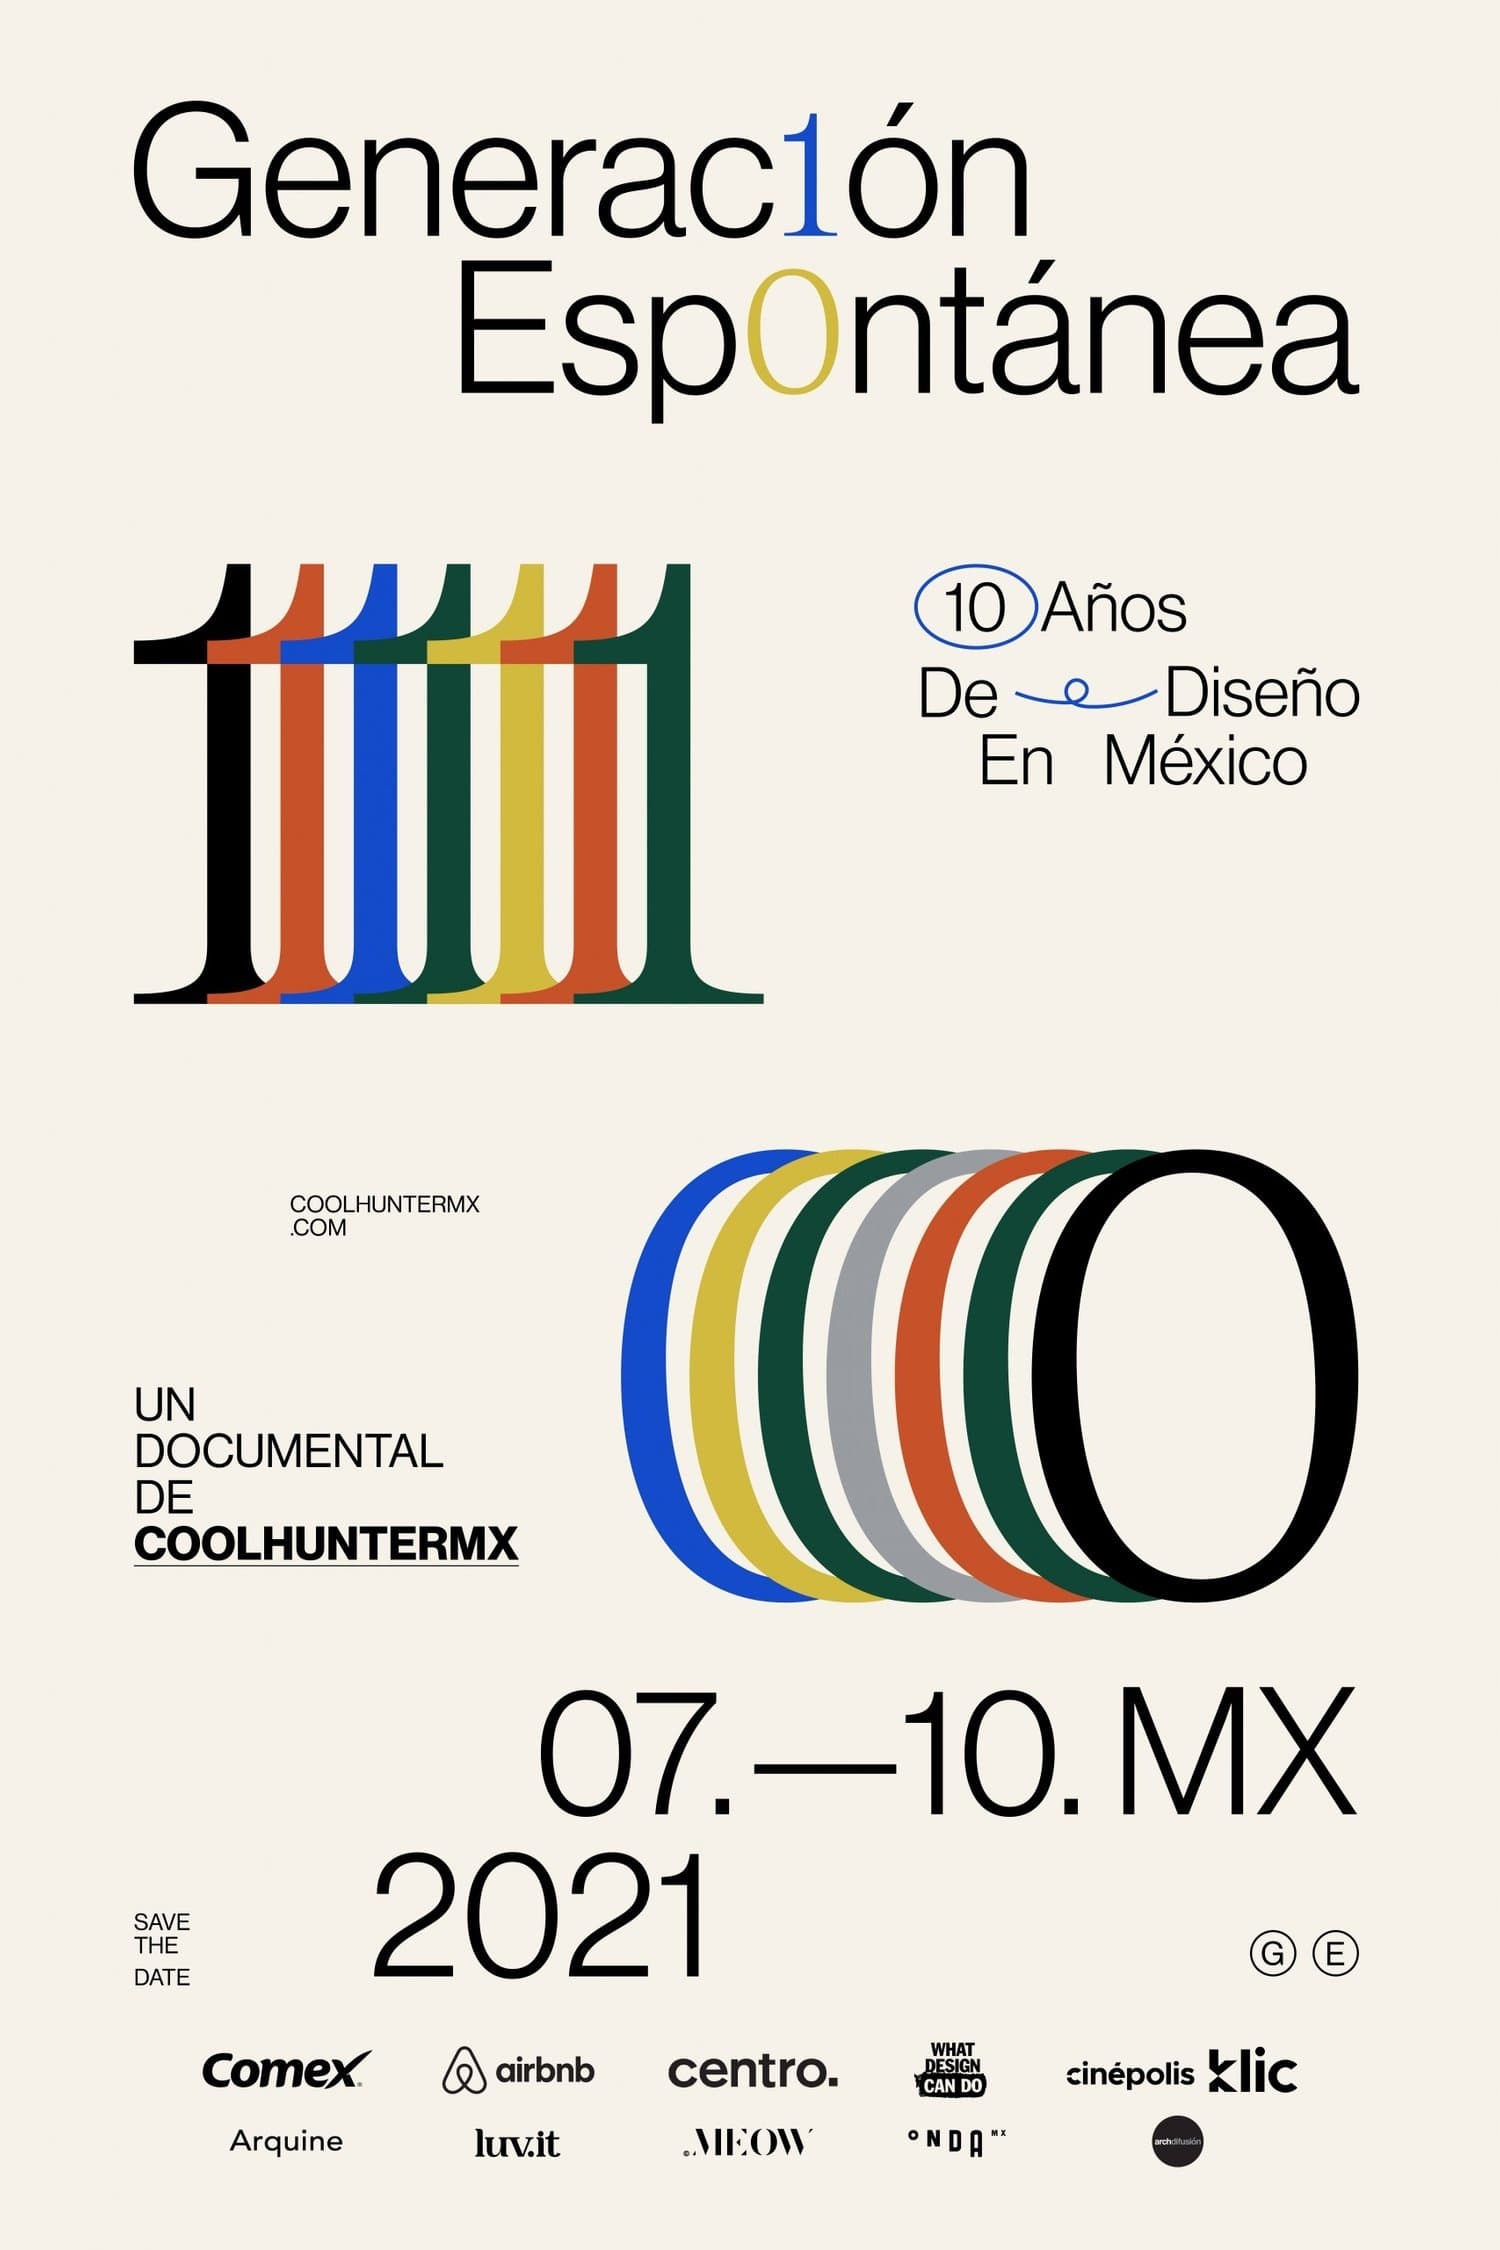 Spontaneous Generation, 10 years of Design in Mexico